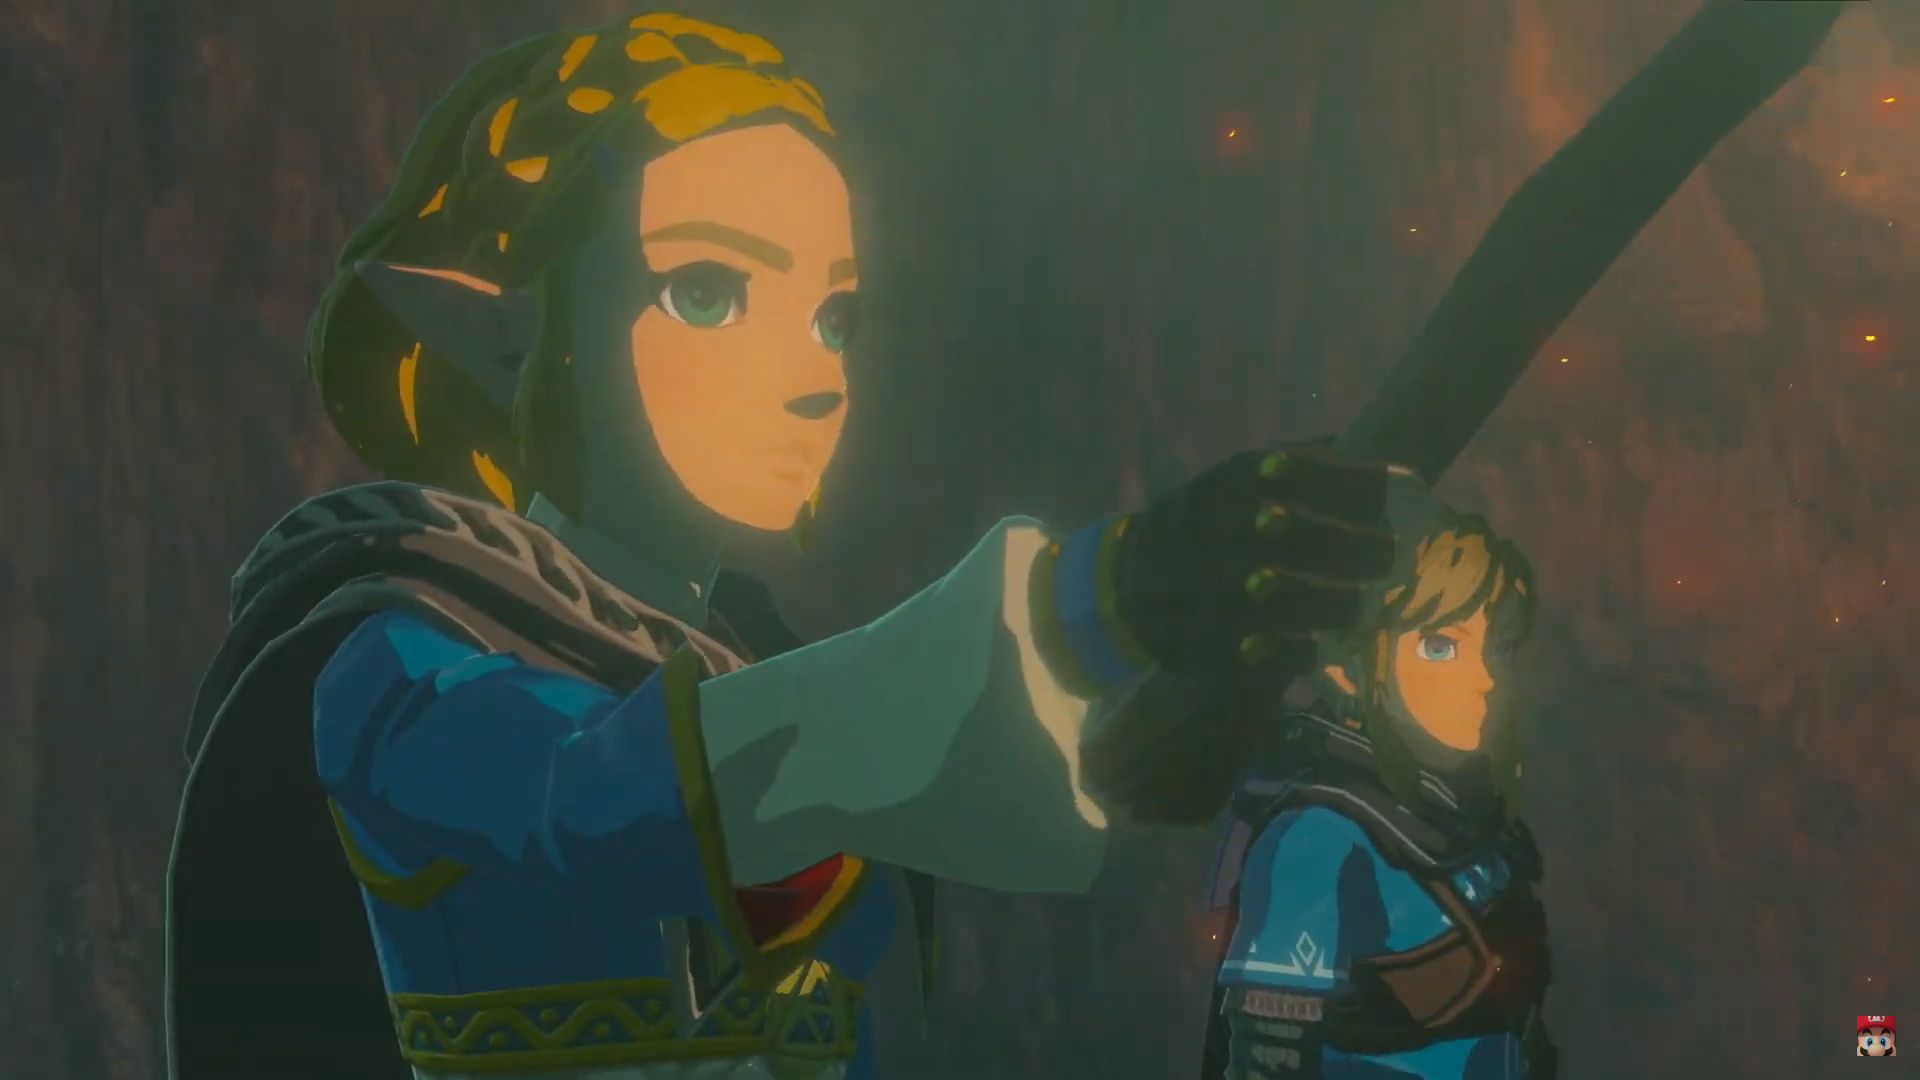 Breath of the Wild Sequel Happening Because Team had too Many DLC Ideas